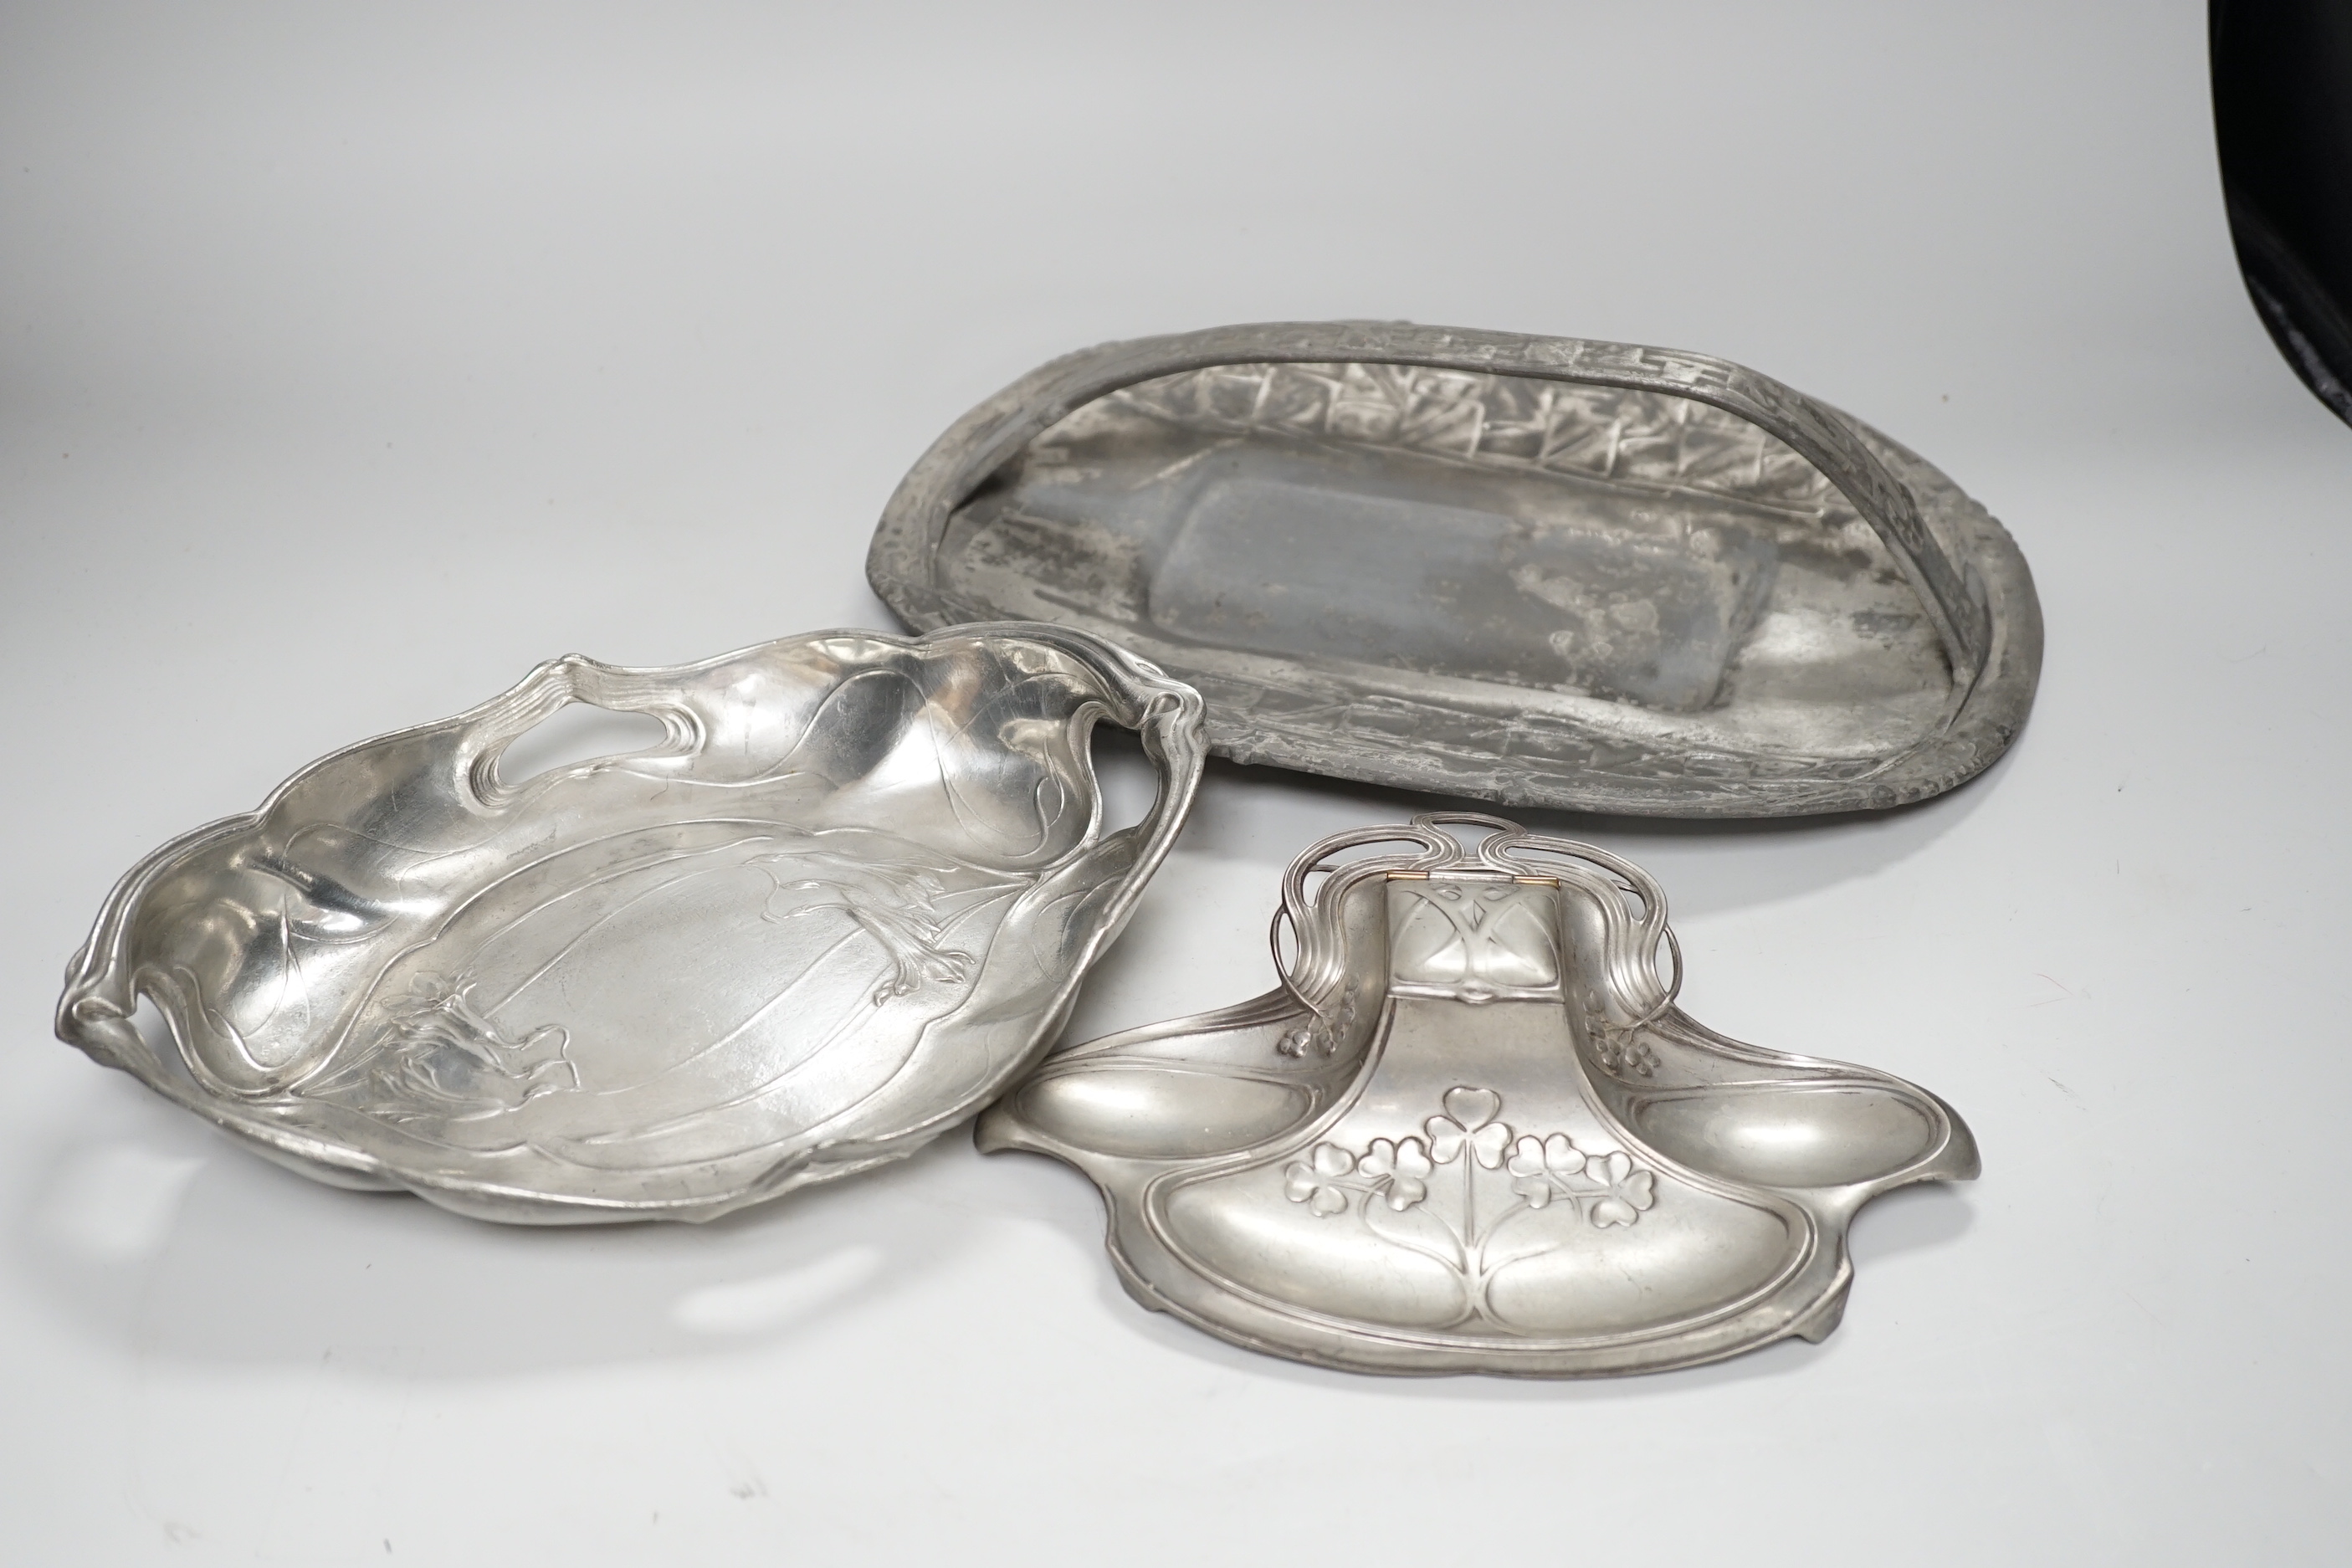 Three pieces Art Nouveau pewter - a WMF inkwell, Tudric handled tray and another piece